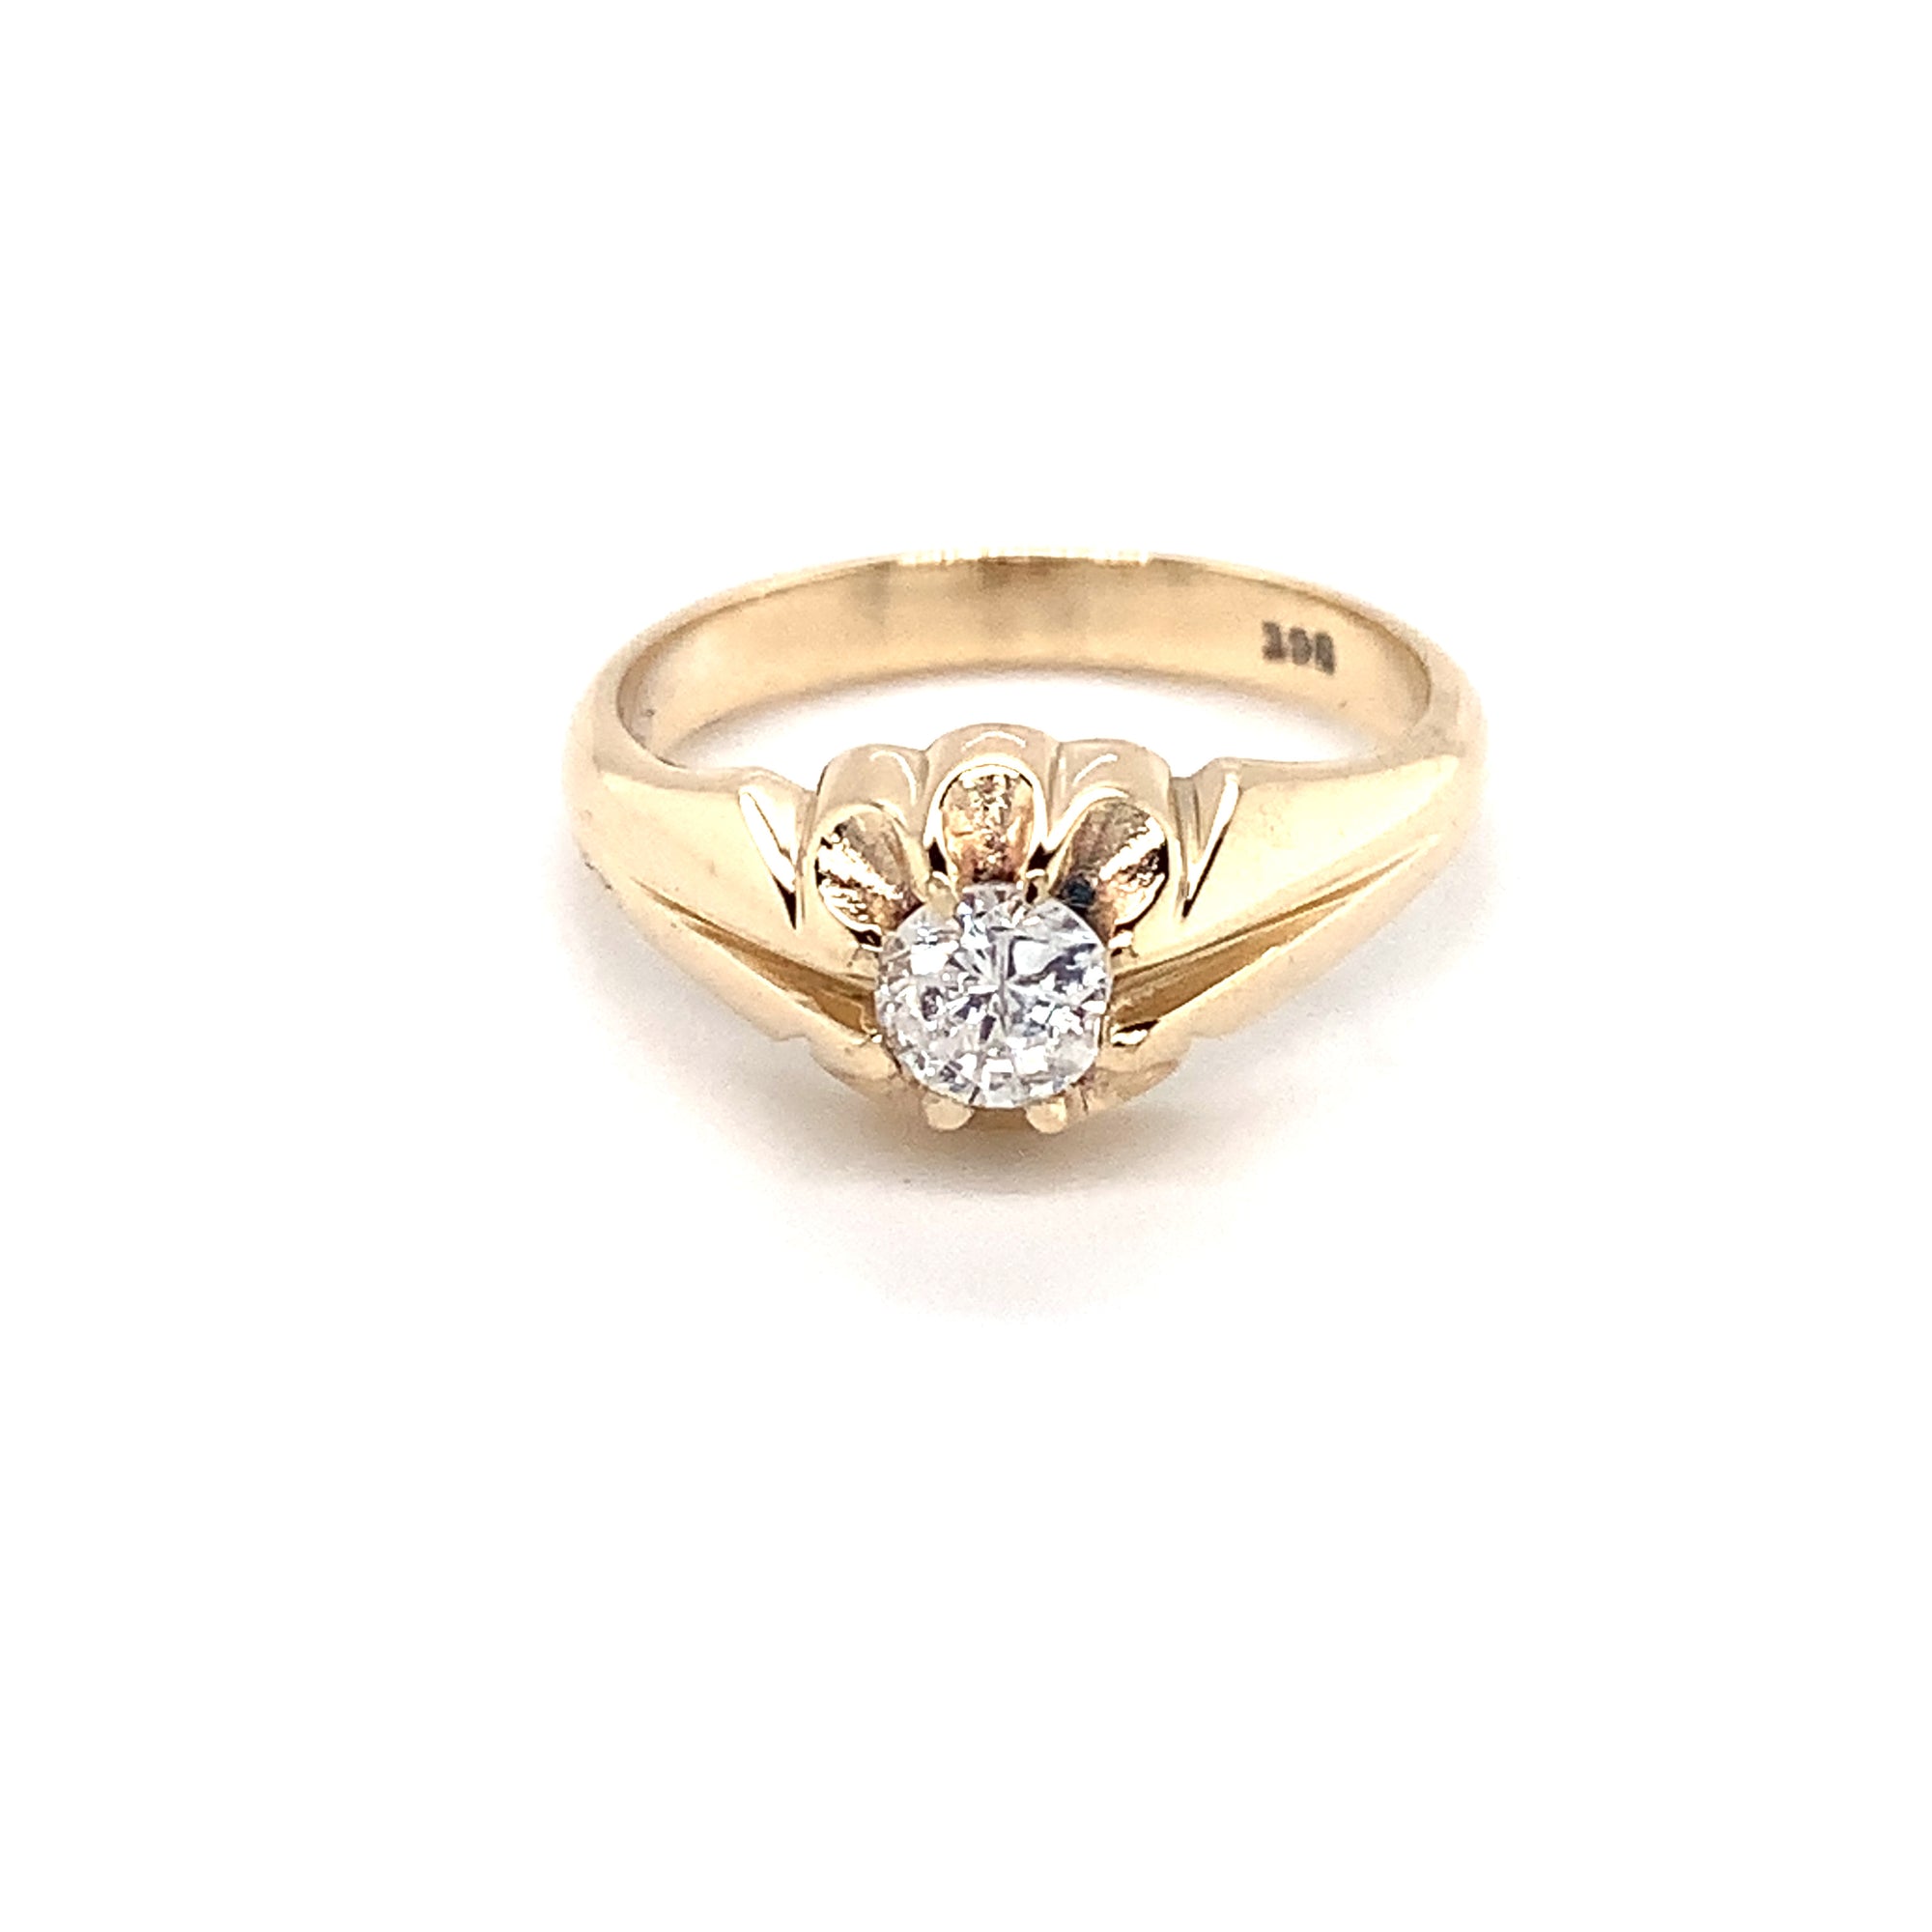 Vintage Diamond Solitaire Signet Ring In 9ct Yellow Gold